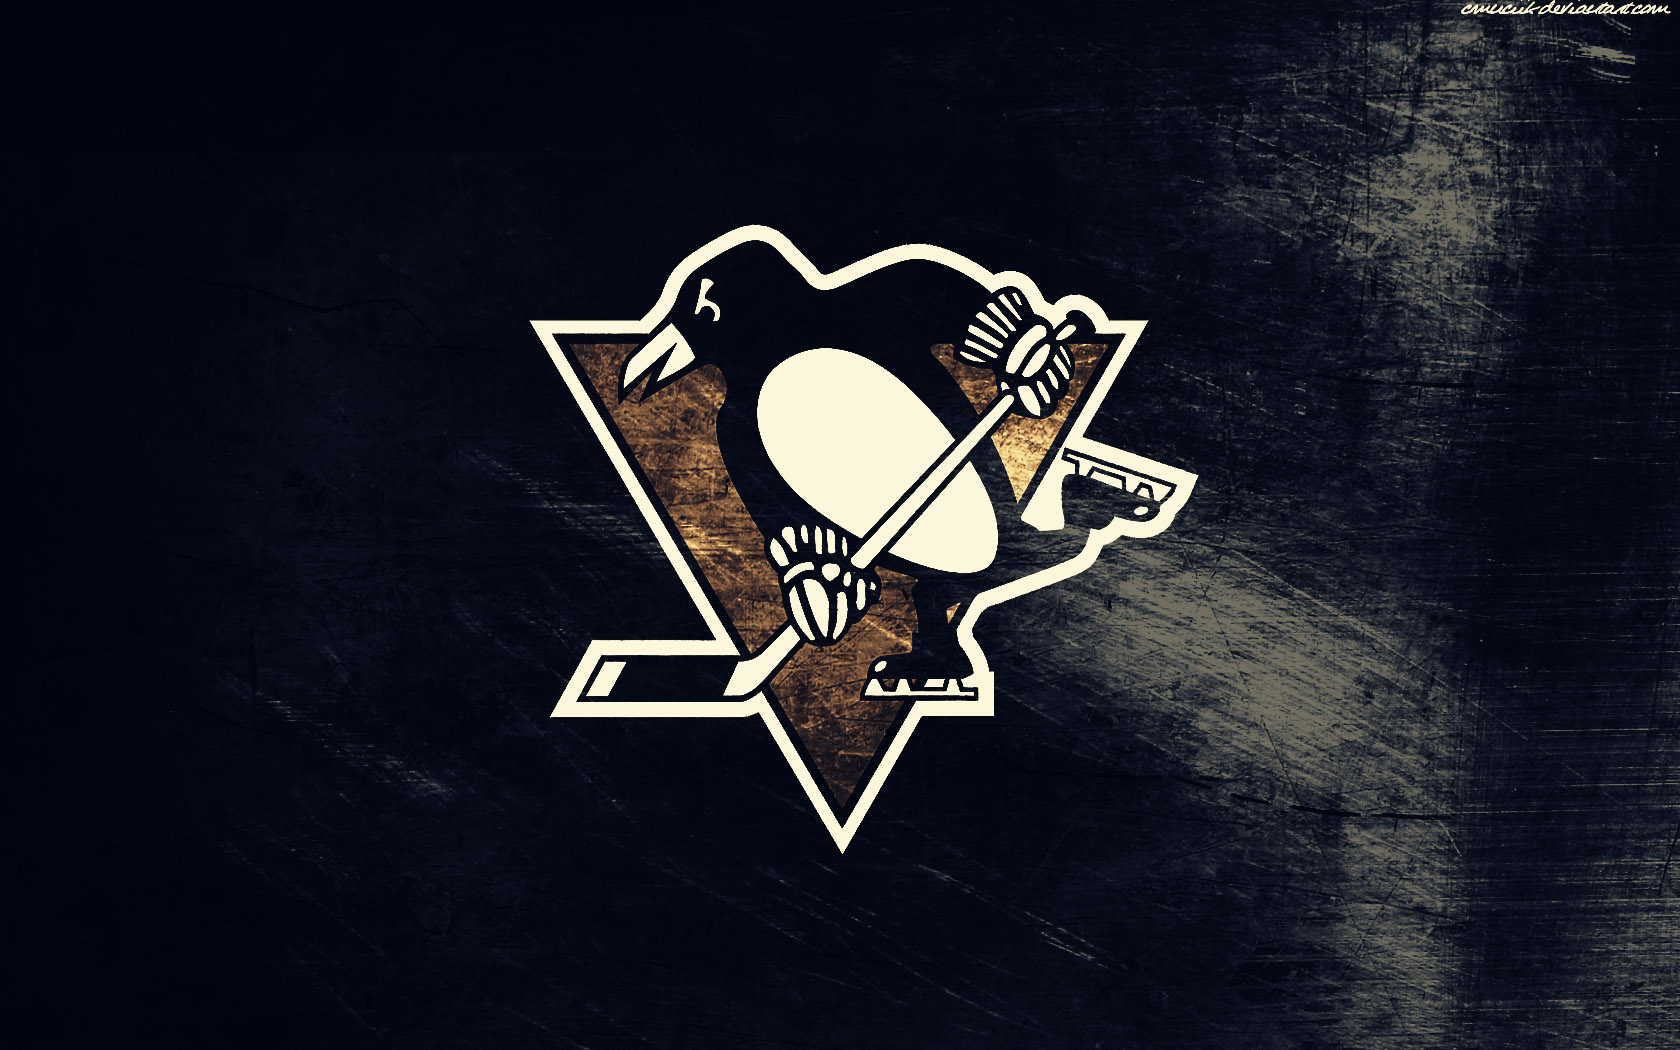  Penguins wallpapers Pittsburgh Penguins background   Page 8